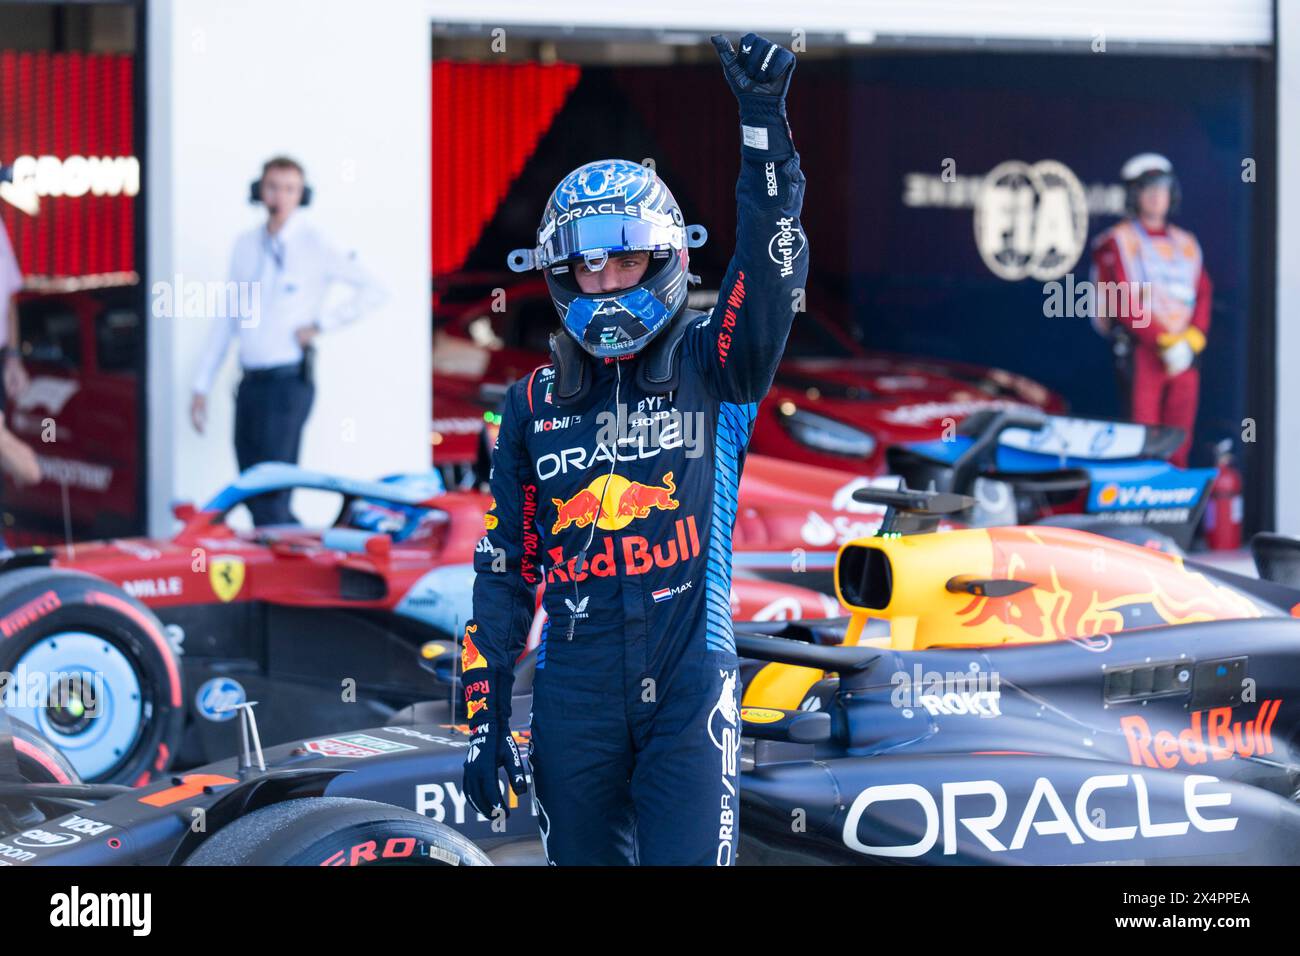 Miami Gardens, United States. 04th May, 2024. Dutch Formula One driver Max Verstappen of Red Bull Racing waves to fans in parc fermé after getting pole position in qualifying for the Formula One Miami Grand Prix at the Miami International Autodrome in Miami Gardens, Florida on Saturday, May 4, 2024 Photo by Greg Nash/UPI Credit: UPI/Alamy Live News Stock Photo